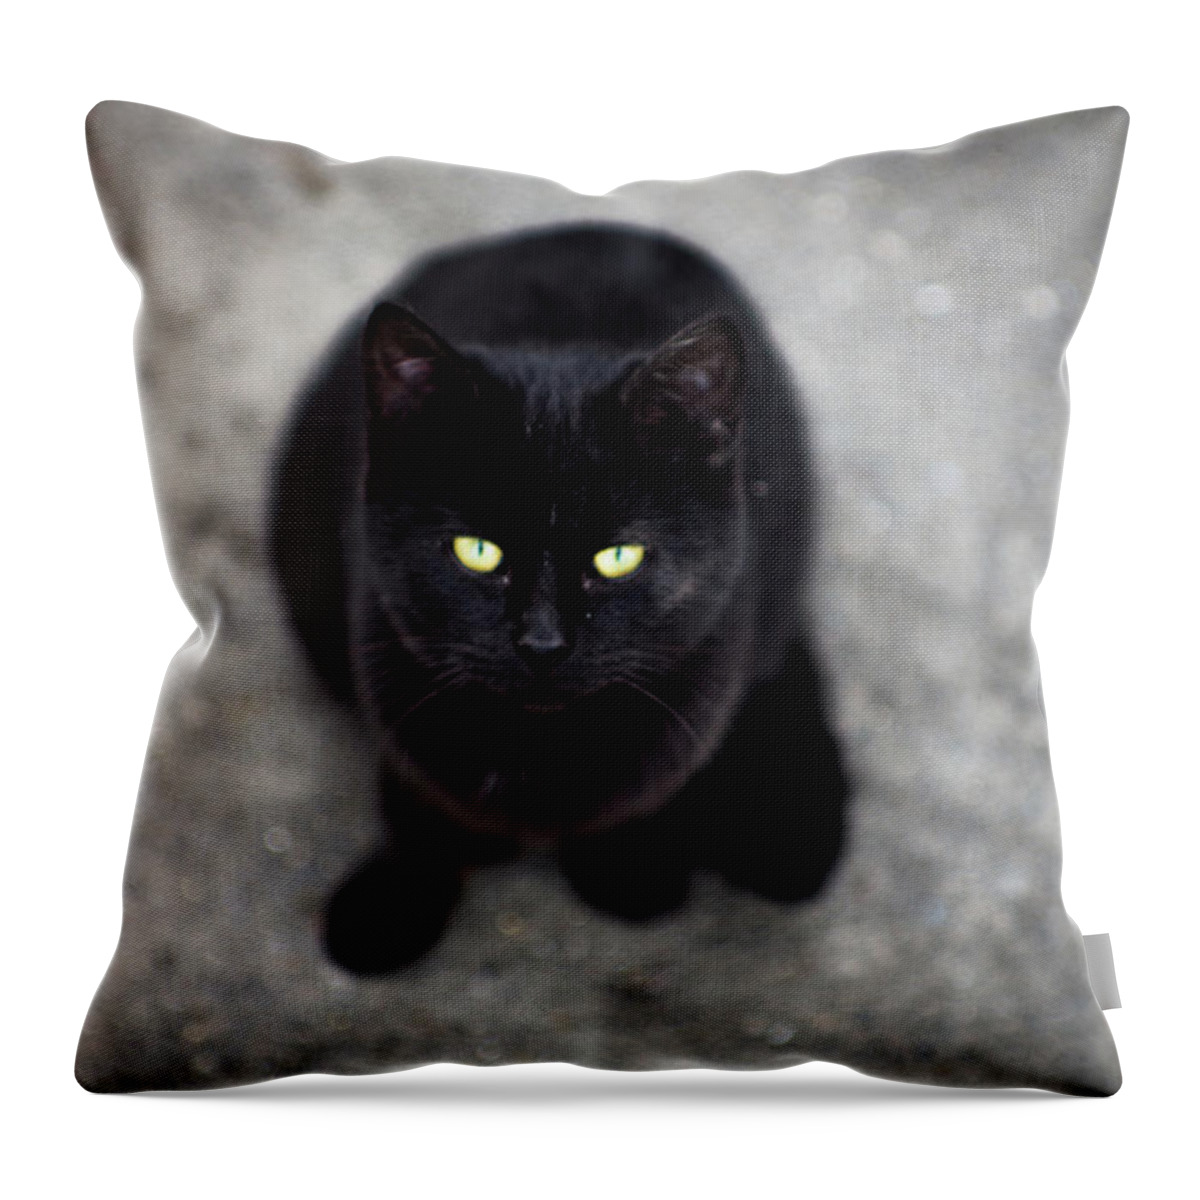 Pets Throw Pillow featuring the photograph Black Kitten Looking Up by Jimss